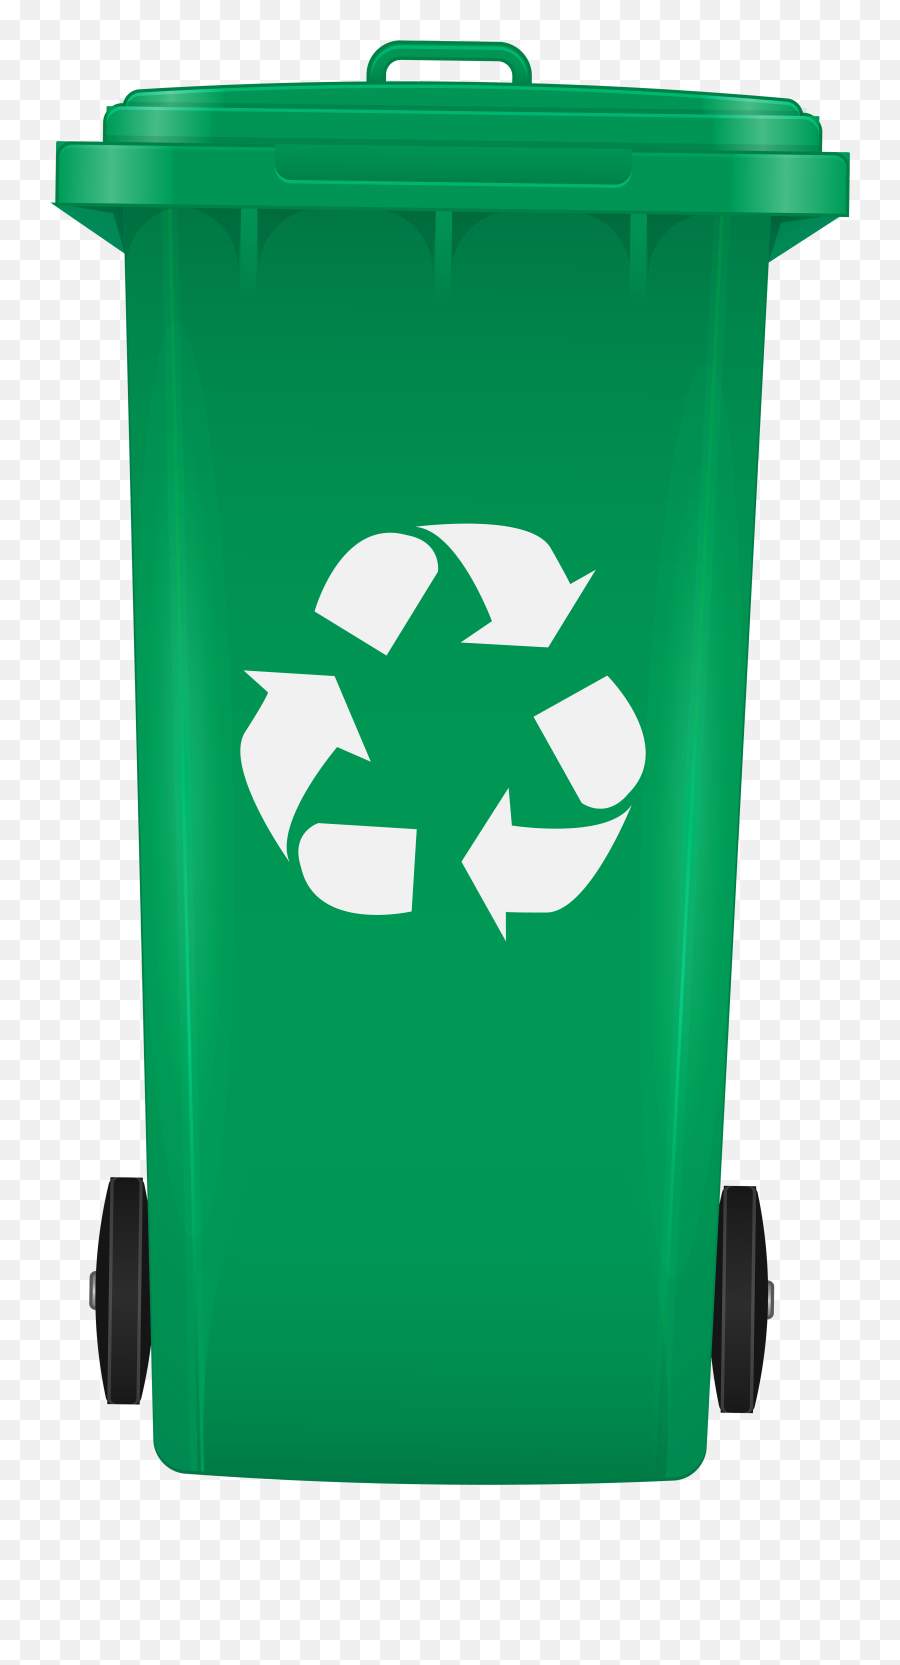 Transparent Background Recycle Bin Clipart - Recycling Bin Png,Trash Can Transparent Background